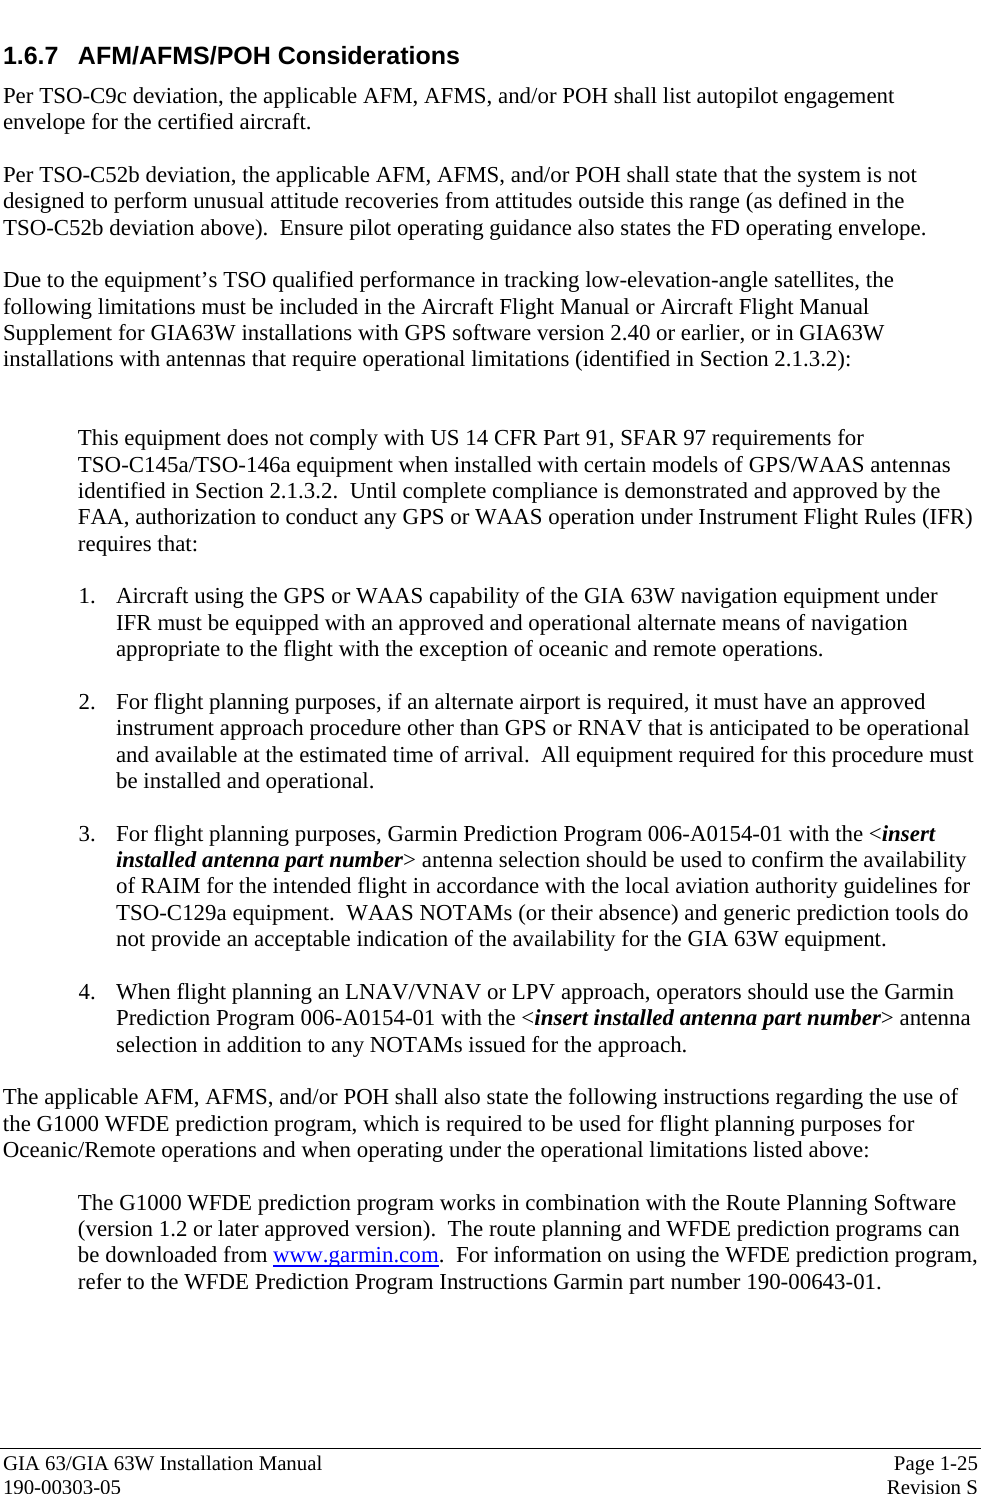  GIA 63/GIA 63W Installation Manual  Page 1-25 190-00303-05  Revision S 1.6.7 AFM/AFMS/POH Considerations Per TSO-C9c deviation, the applicable AFM, AFMS, and/or POH shall list autopilot engagement envelope for the certified aircraft.  Per TSO-C52b deviation, the applicable AFM, AFMS, and/or POH shall state that the system is not designed to perform unusual attitude recoveries from attitudes outside this range (as defined in the  TSO-C52b deviation above).  Ensure pilot operating guidance also states the FD operating envelope.  Due to the equipment’s TSO qualified performance in tracking low-elevation-angle satellites, the following limitations must be included in the Aircraft Flight Manual or Aircraft Flight Manual Supplement for GIA63W installations with GPS software version 2.40 or earlier, or in GIA63W installations with antennas that require operational limitations (identified in Section 2.1.3.2):   This equipment does not comply with US 14 CFR Part 91, SFAR 97 requirements for  TSO-C145a/TSO-146a equipment when installed with certain models of GPS/WAAS antennas identified in Section 2.1.3.2.  Until complete compliance is demonstrated and approved by the FAA, authorization to conduct any GPS or WAAS operation under Instrument Flight Rules (IFR) requires that:  1. Aircraft using the GPS or WAAS capability of the GIA 63W navigation equipment under IFR must be equipped with an approved and operational alternate means of navigation appropriate to the flight with the exception of oceanic and remote operations.   2. For flight planning purposes, if an alternate airport is required, it must have an approved instrument approach procedure other than GPS or RNAV that is anticipated to be operational and available at the estimated time of arrival.  All equipment required for this procedure must be installed and operational.  3. For flight planning purposes, Garmin Prediction Program 006-A0154-01 with the &lt;insert installed antenna part number&gt; antenna selection should be used to confirm the availability of RAIM for the intended flight in accordance with the local aviation authority guidelines for TSO-C129a equipment.  WAAS NOTAMs (or their absence) and generic prediction tools do not provide an acceptable indication of the availability for the GIA 63W equipment.  4. When flight planning an LNAV/VNAV or LPV approach, operators should use the Garmin Prediction Program 006-A0154-01 with the &lt;insert installed antenna part number&gt; antenna selection in addition to any NOTAMs issued for the approach.  The applicable AFM, AFMS, and/or POH shall also state the following instructions regarding the use of the G1000 WFDE prediction program, which is required to be used for flight planning purposes for Oceanic/Remote operations and when operating under the operational limitations listed above:  The G1000 WFDE prediction program works in combination with the Route Planning Software (version 1.2 or later approved version).  The route planning and WFDE prediction programs can be downloaded from www.garmin.com.  For information on using the WFDE prediction program, refer to the WFDE Prediction Program Instructions Garmin part number 190-00643-01. 